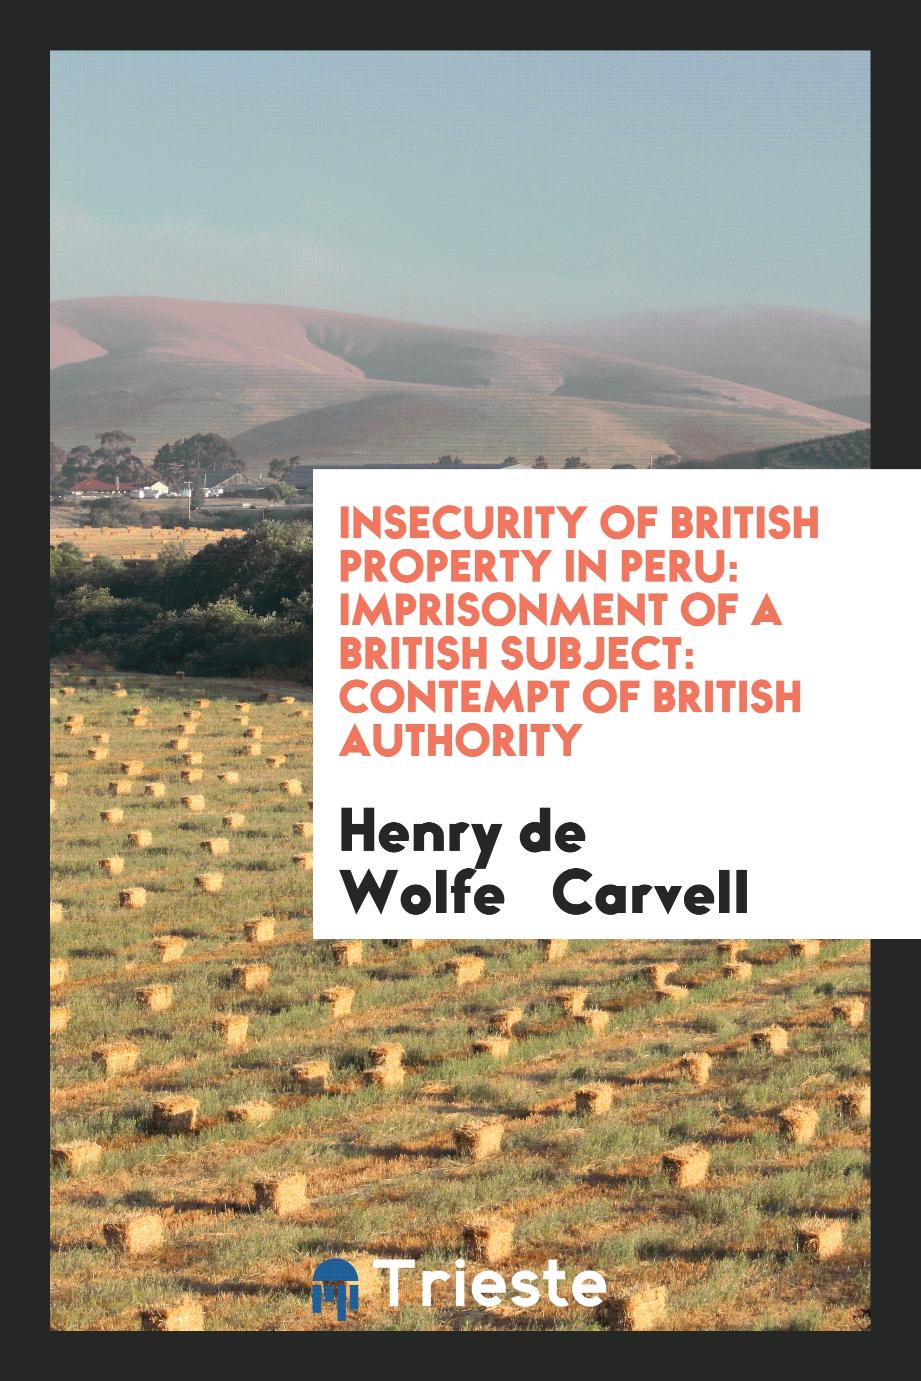 Insecurity of British Property in Peru: Imprisonment of a British Subject: Contempt of British Authority